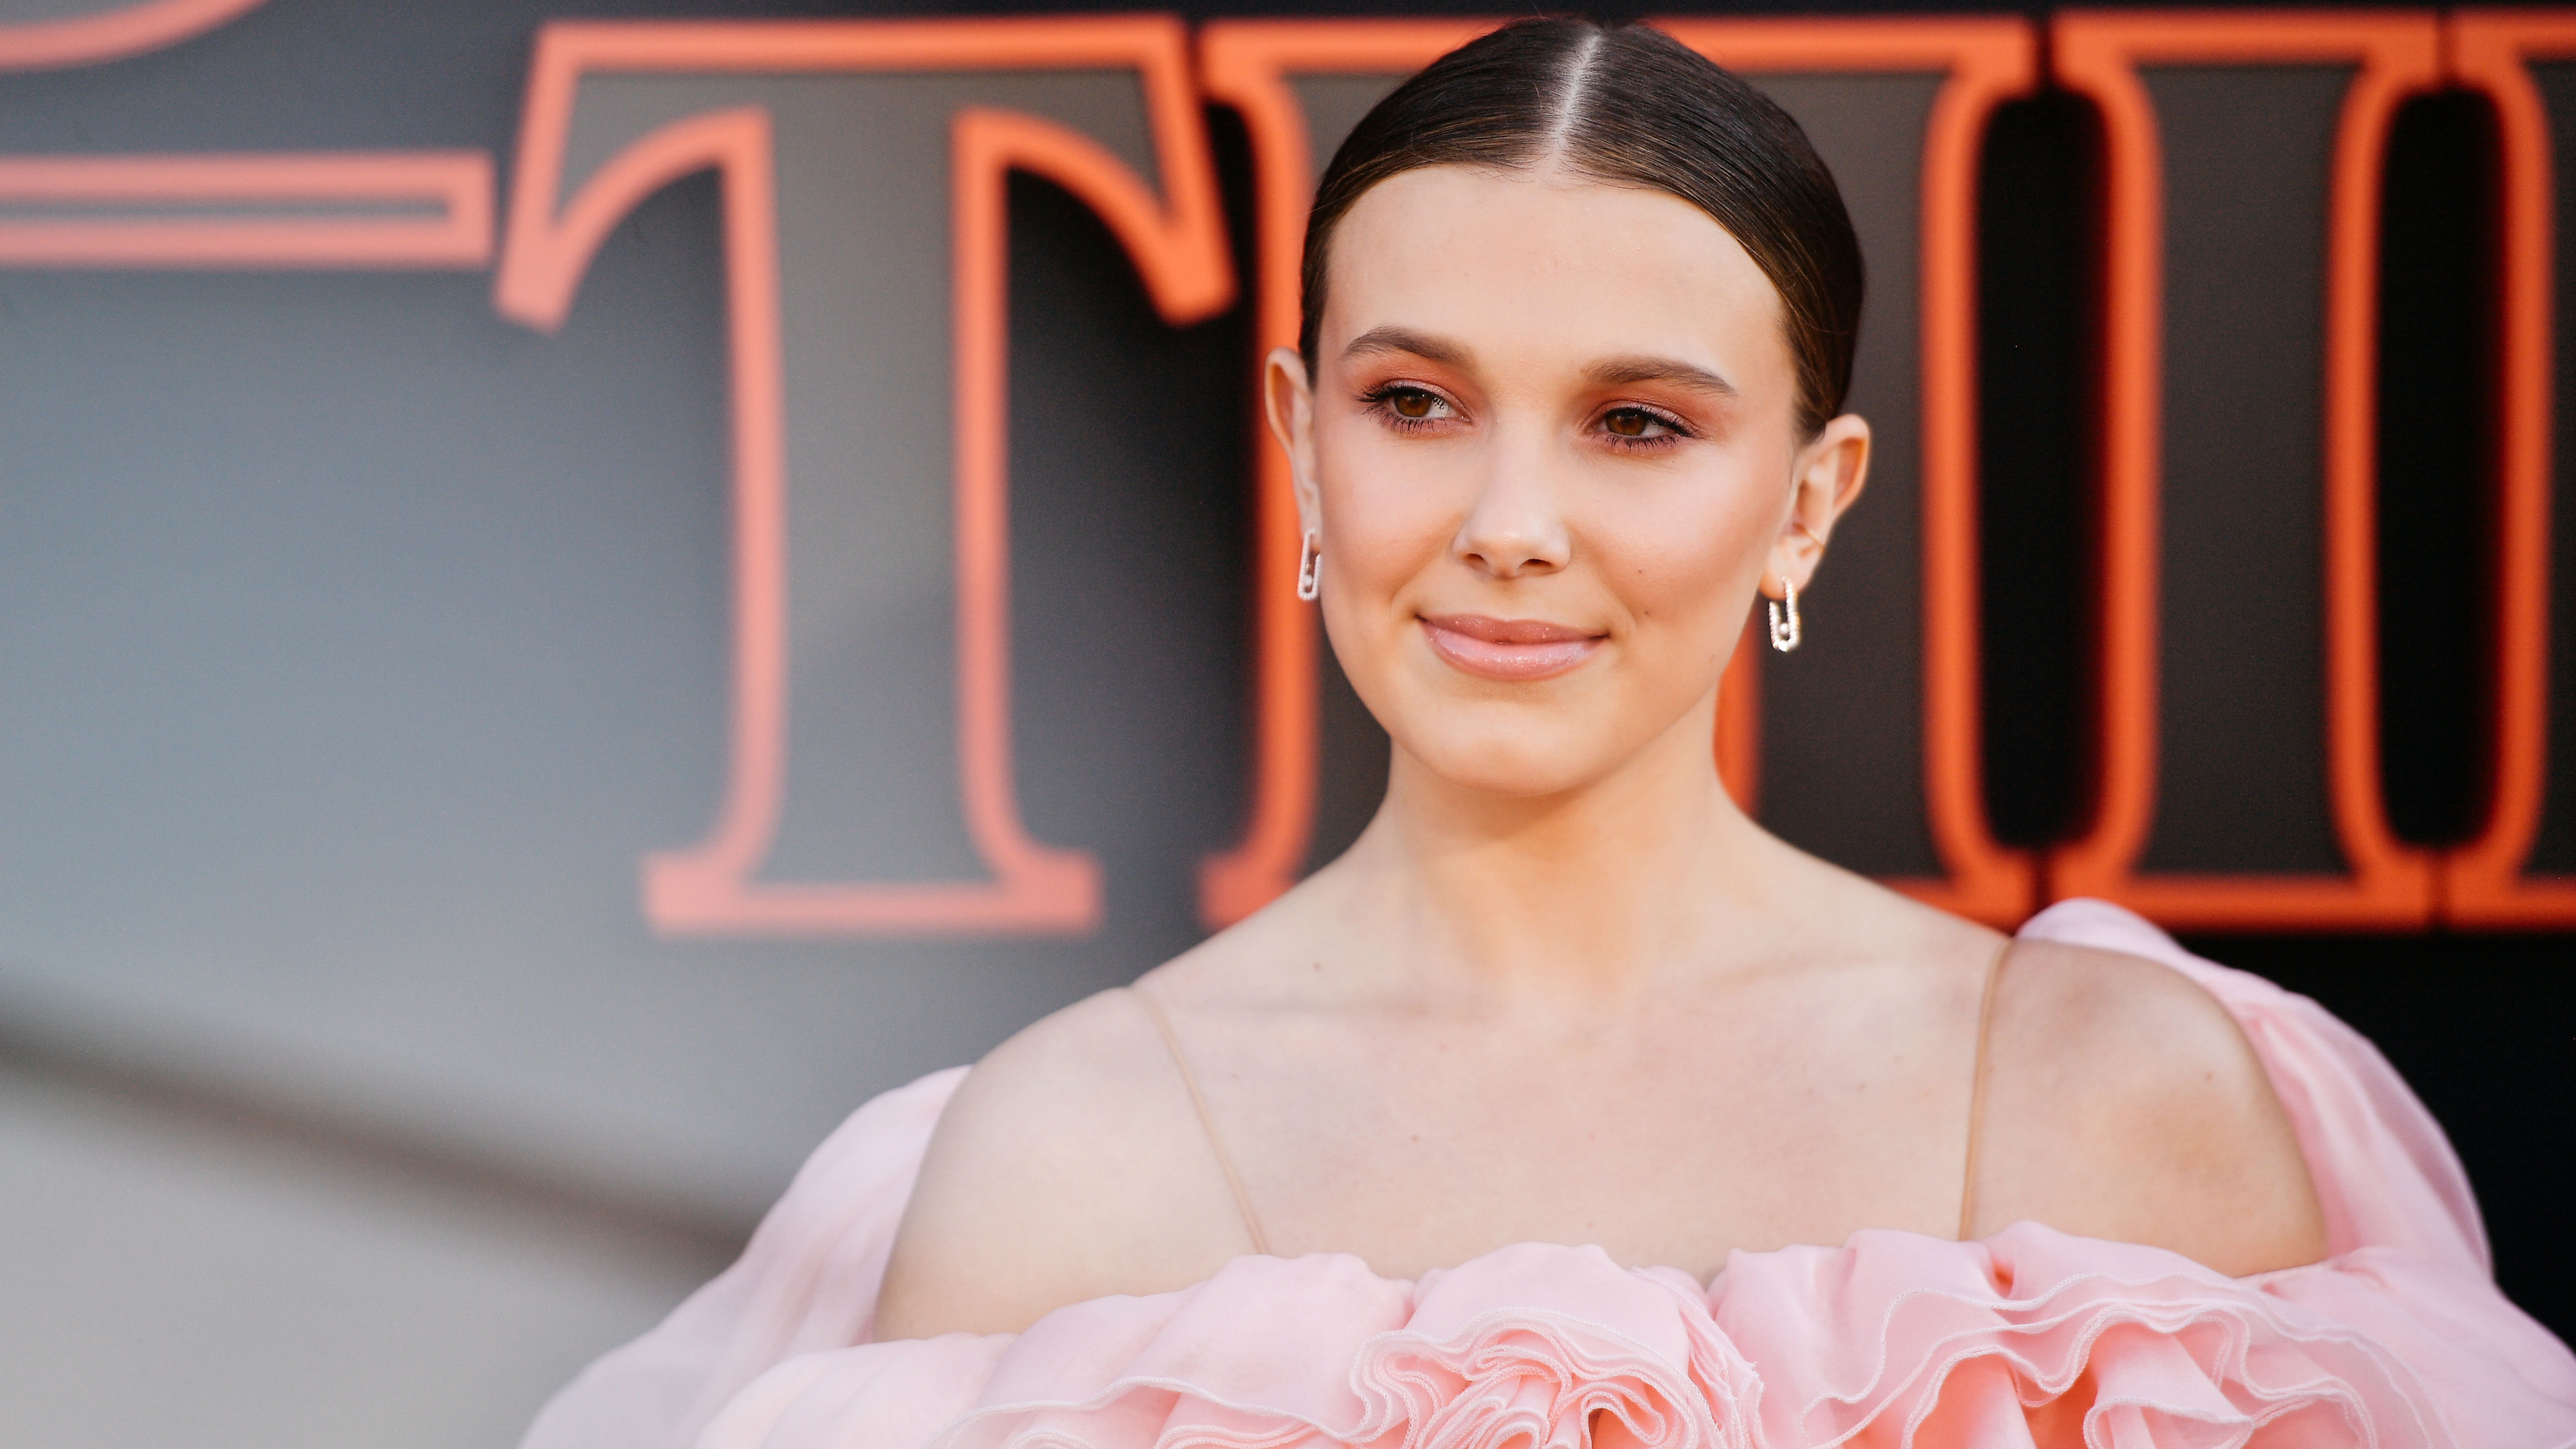 Millie Bobby Brown Is Launching A Beauty Line Called Florence By Mills